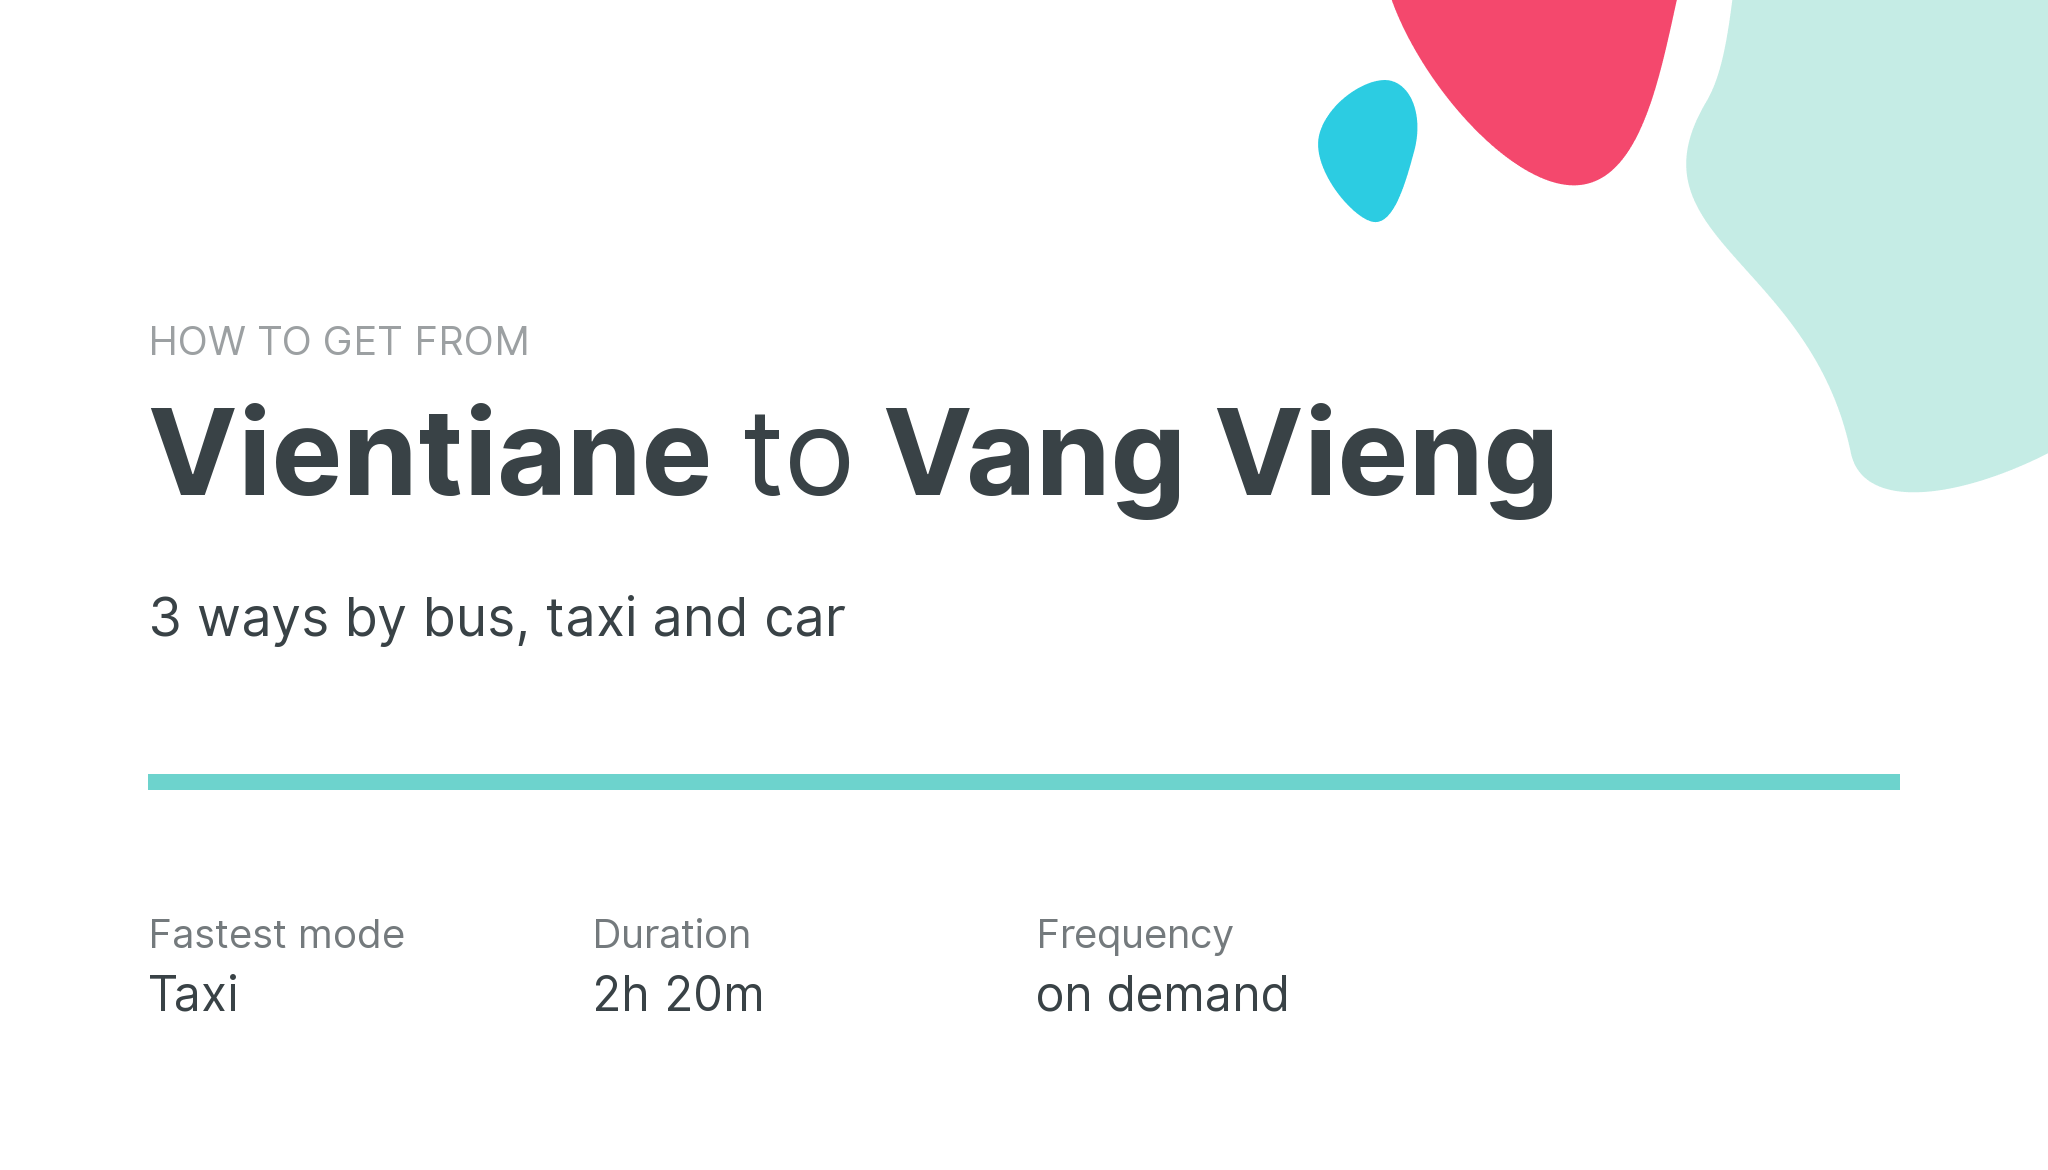 How do I get from Vientiane to Vang Vieng